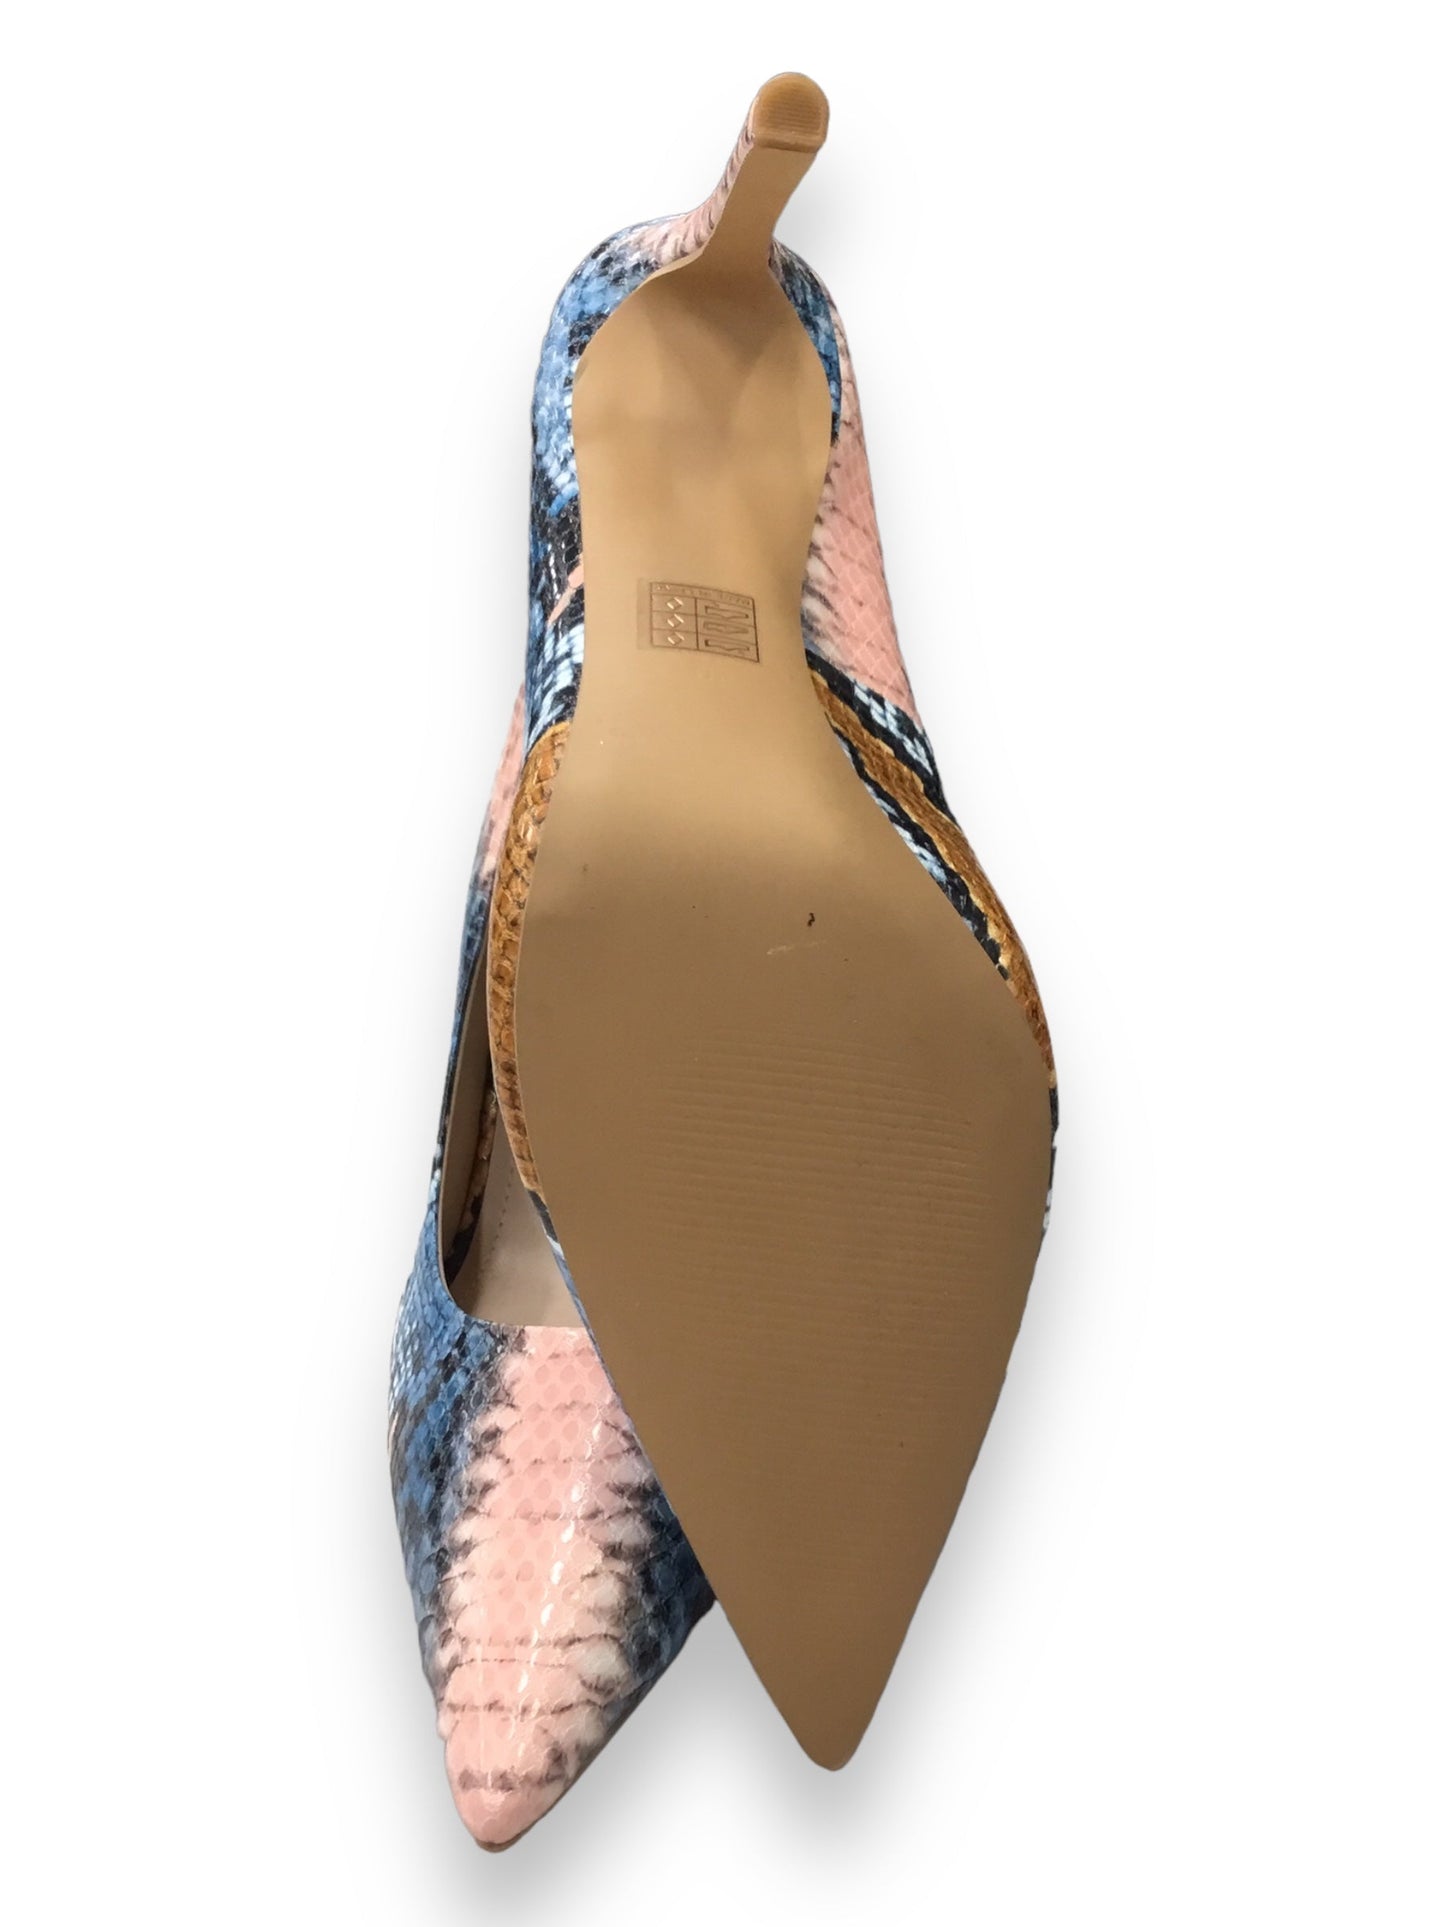 Blue & Pink Shoes Heels Stiletto Clothes Mentor, Size 10